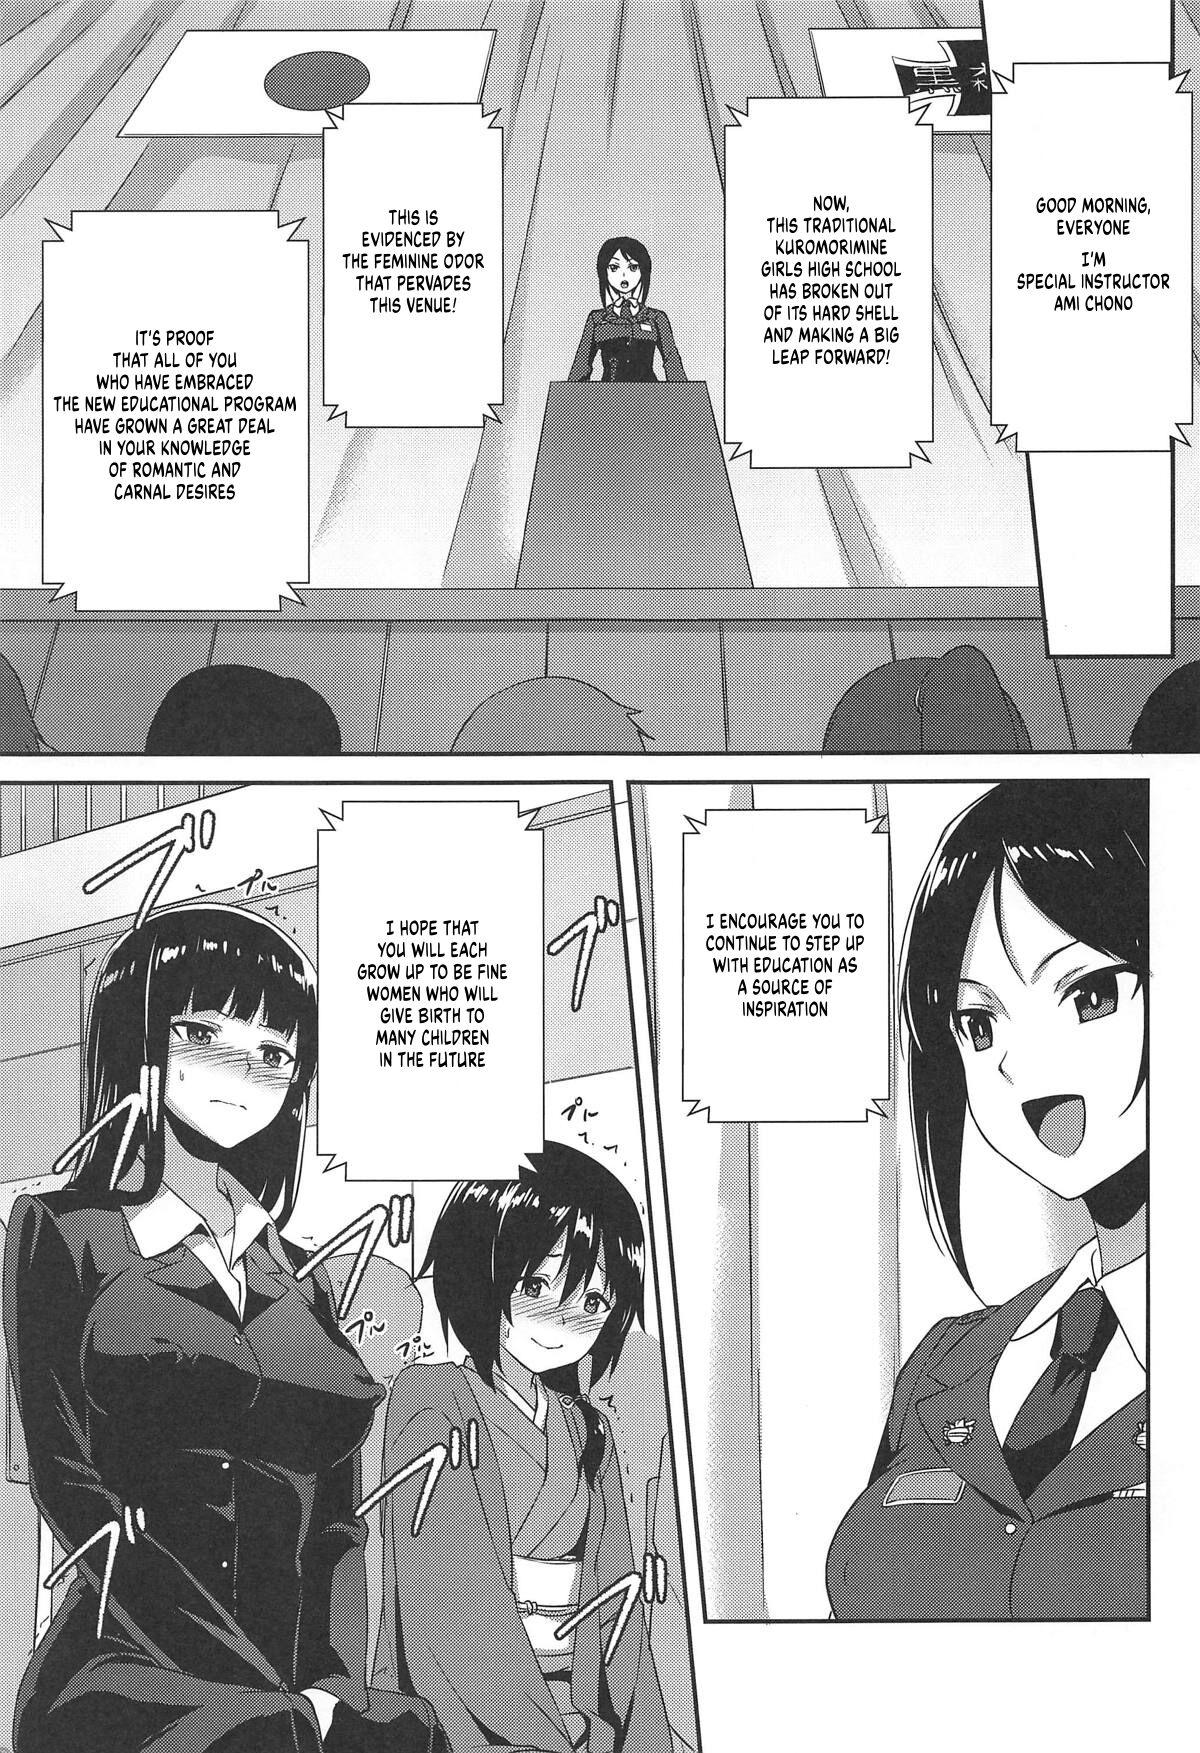 The Way How a Matriarch is Brought Up - Maho's Case, Bottom 24